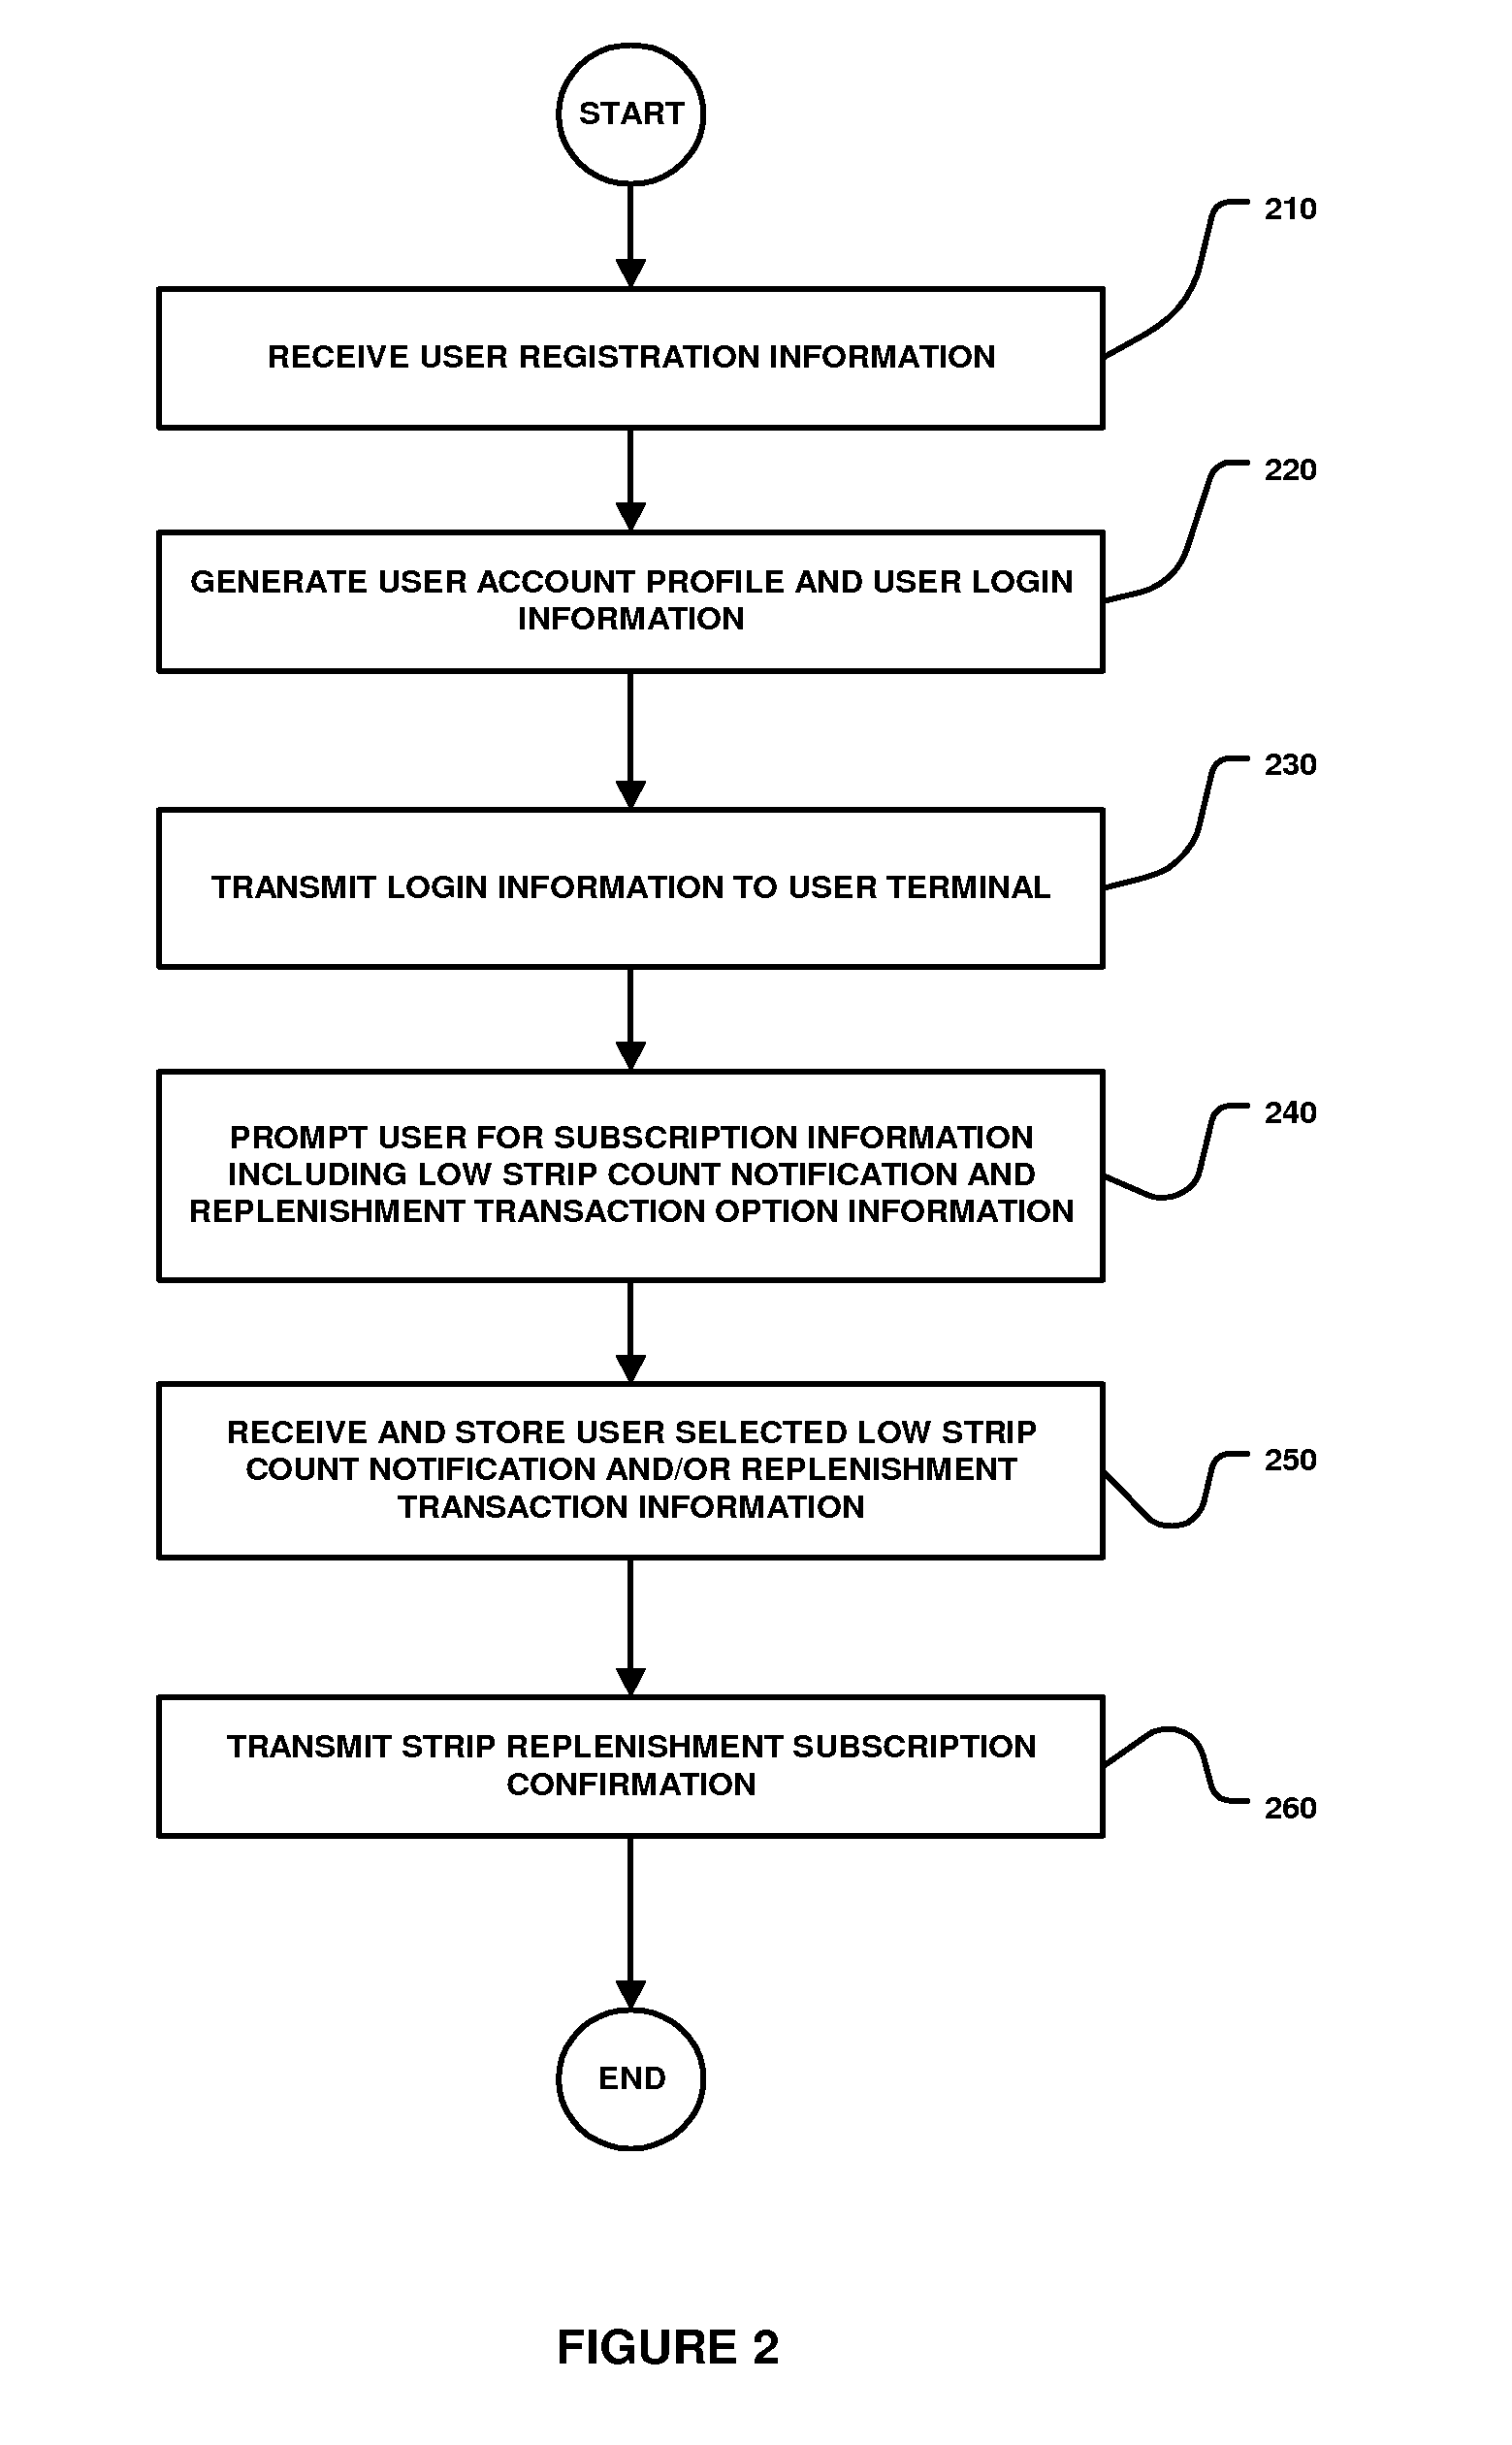 Method and system for monitoring consumable item usage and providing replenishment thereof